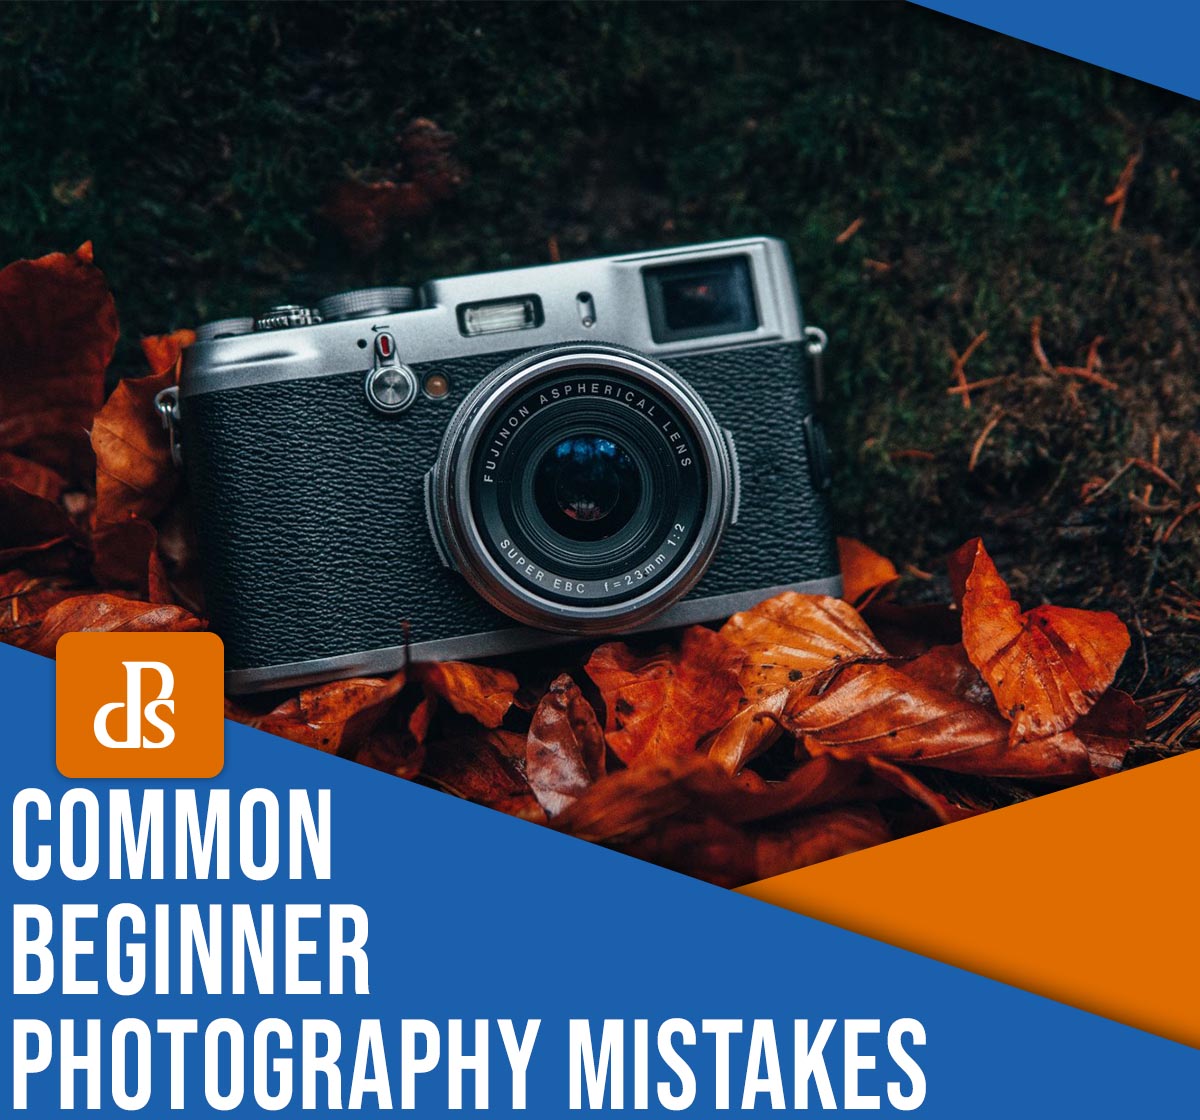 Common beginner photography mistakes